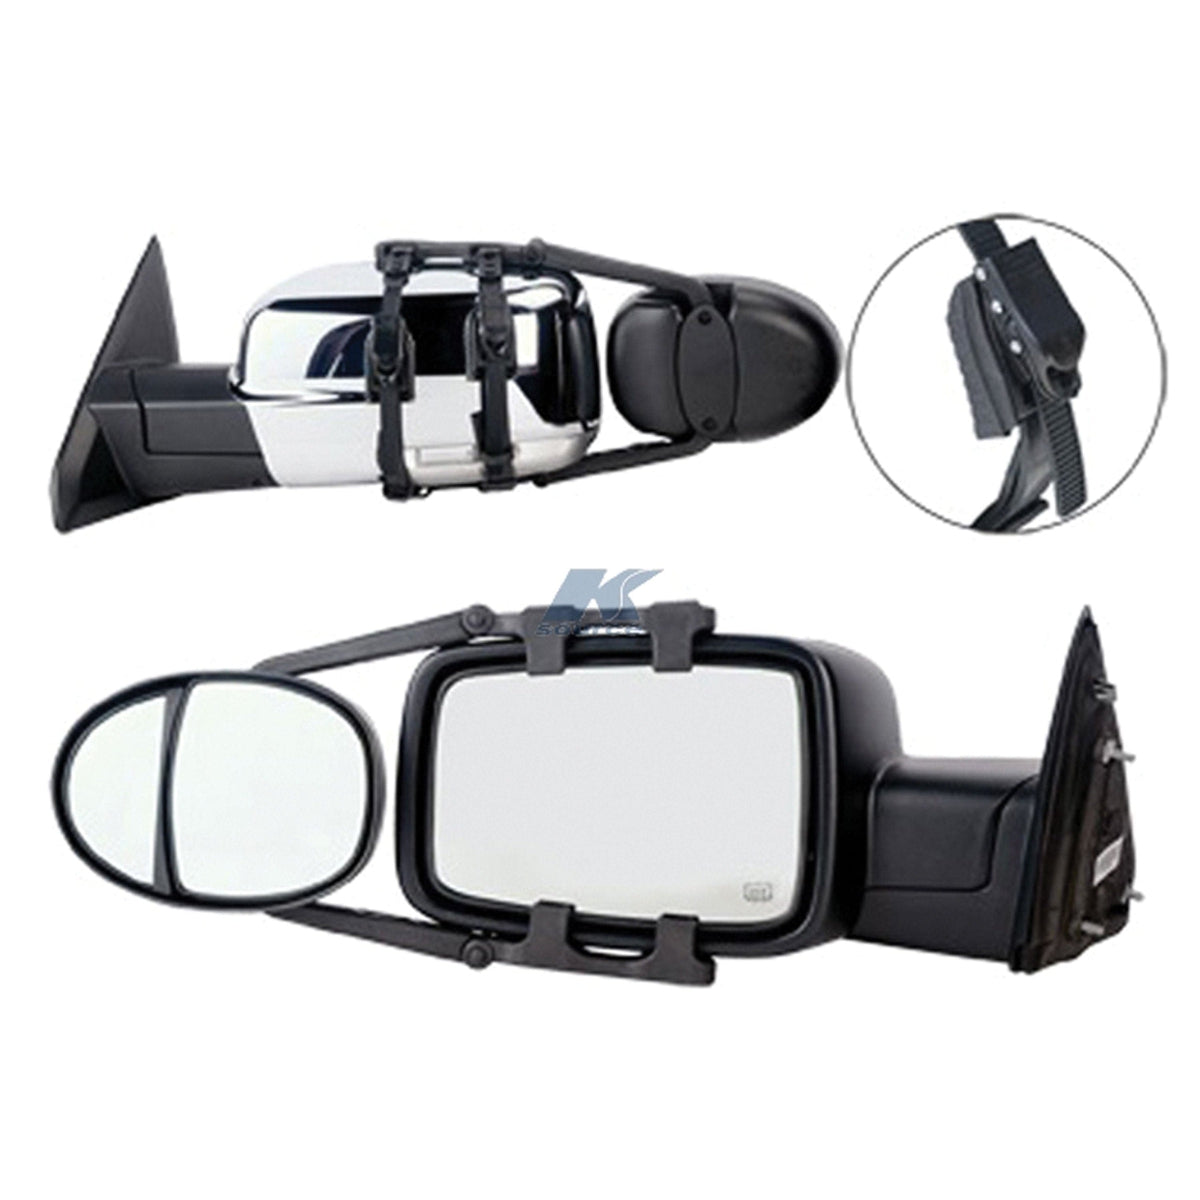 K-Source Qualifies for Free Shipping K-Source Dual Lens Towing Mirror with Ratchet Mount System Pair #3990